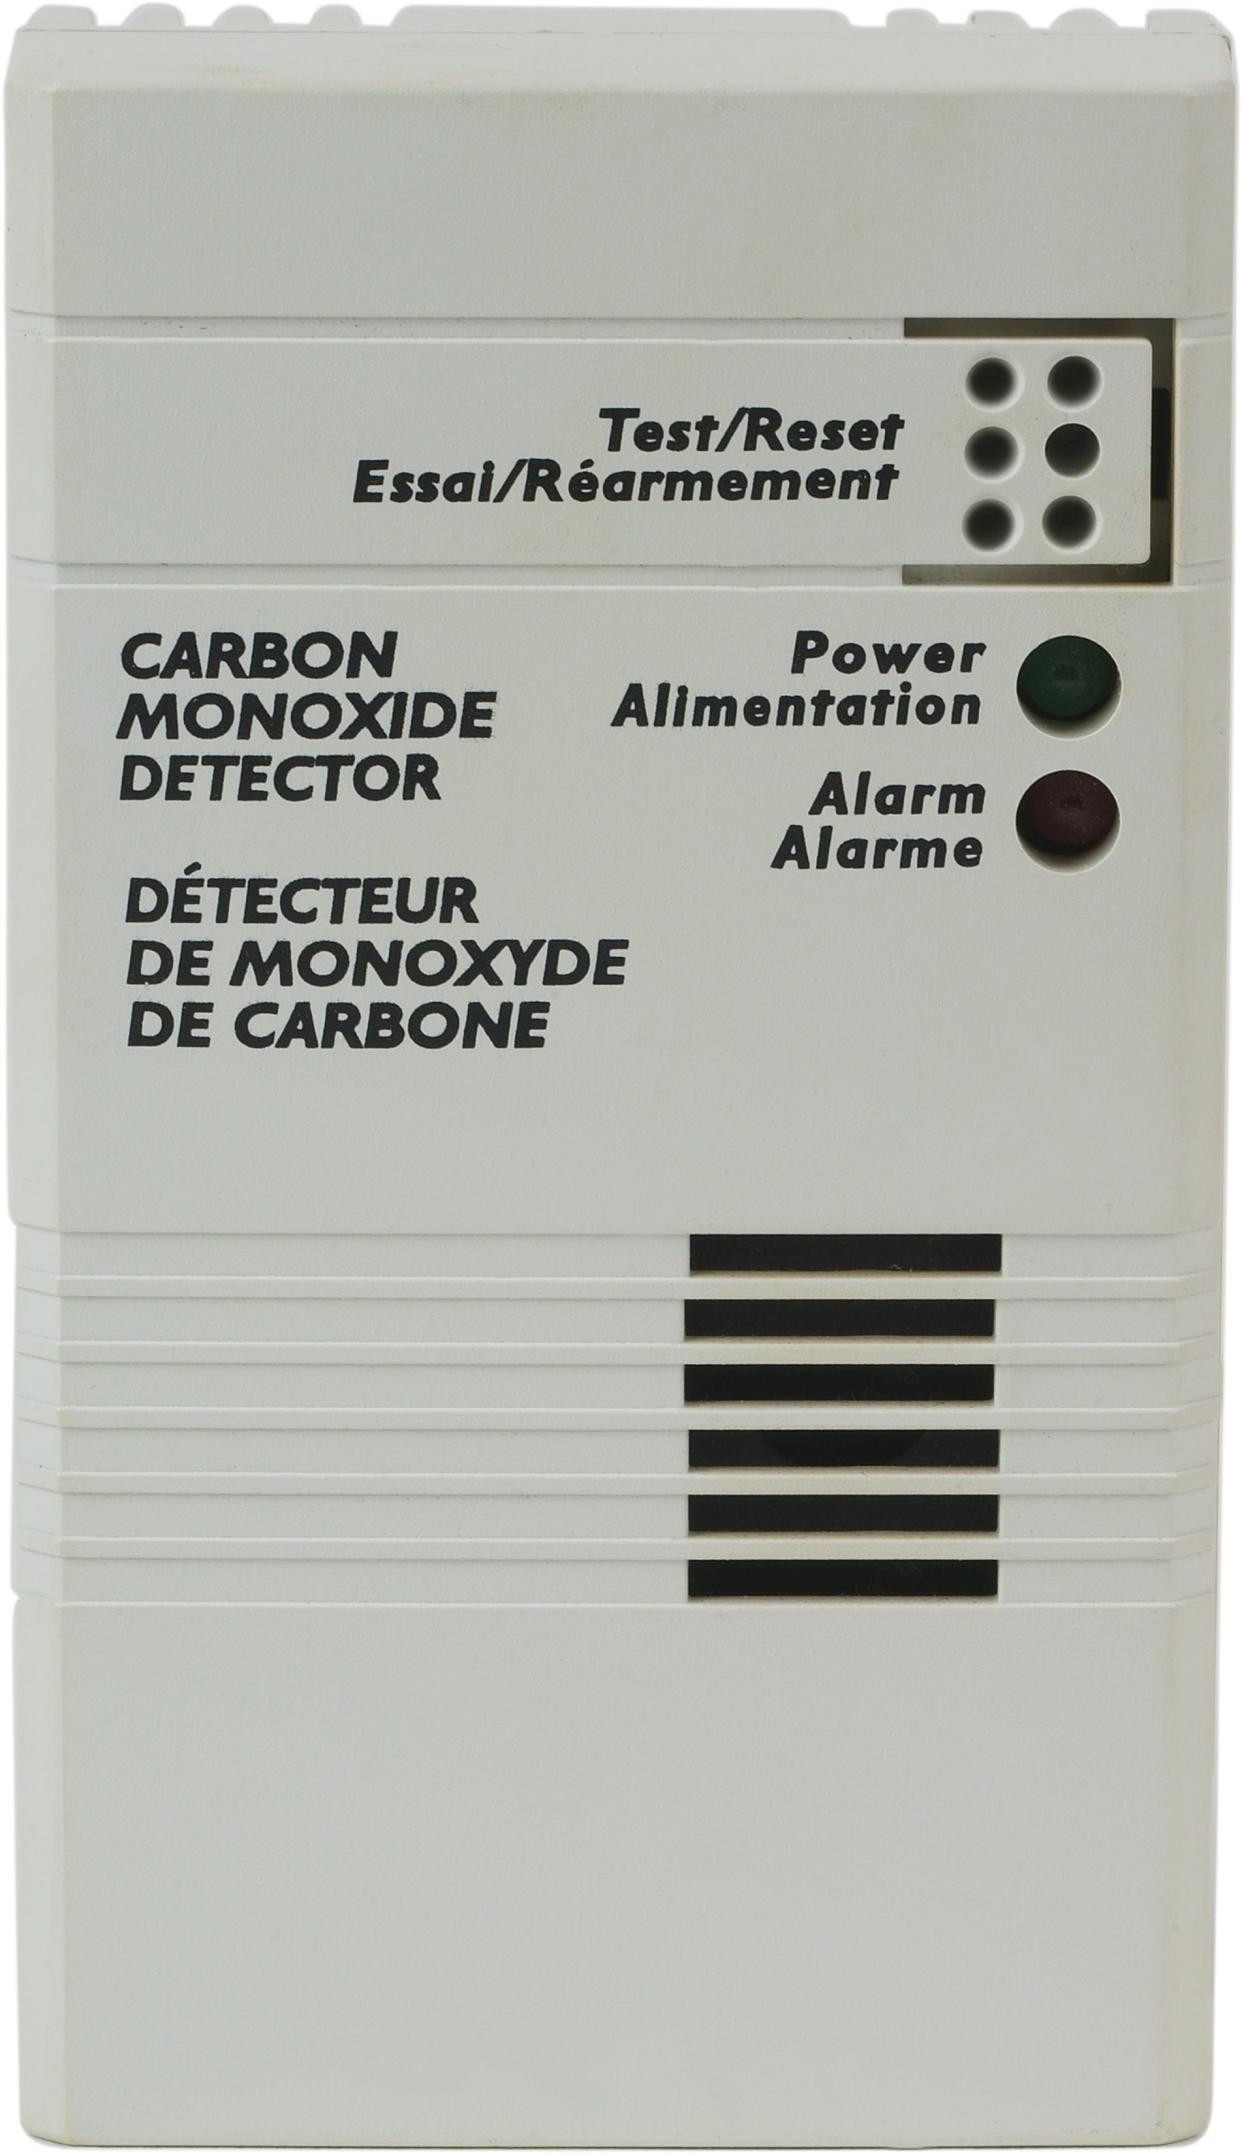 The presence of carbon monoxide in the home is easily detected by special alarms.